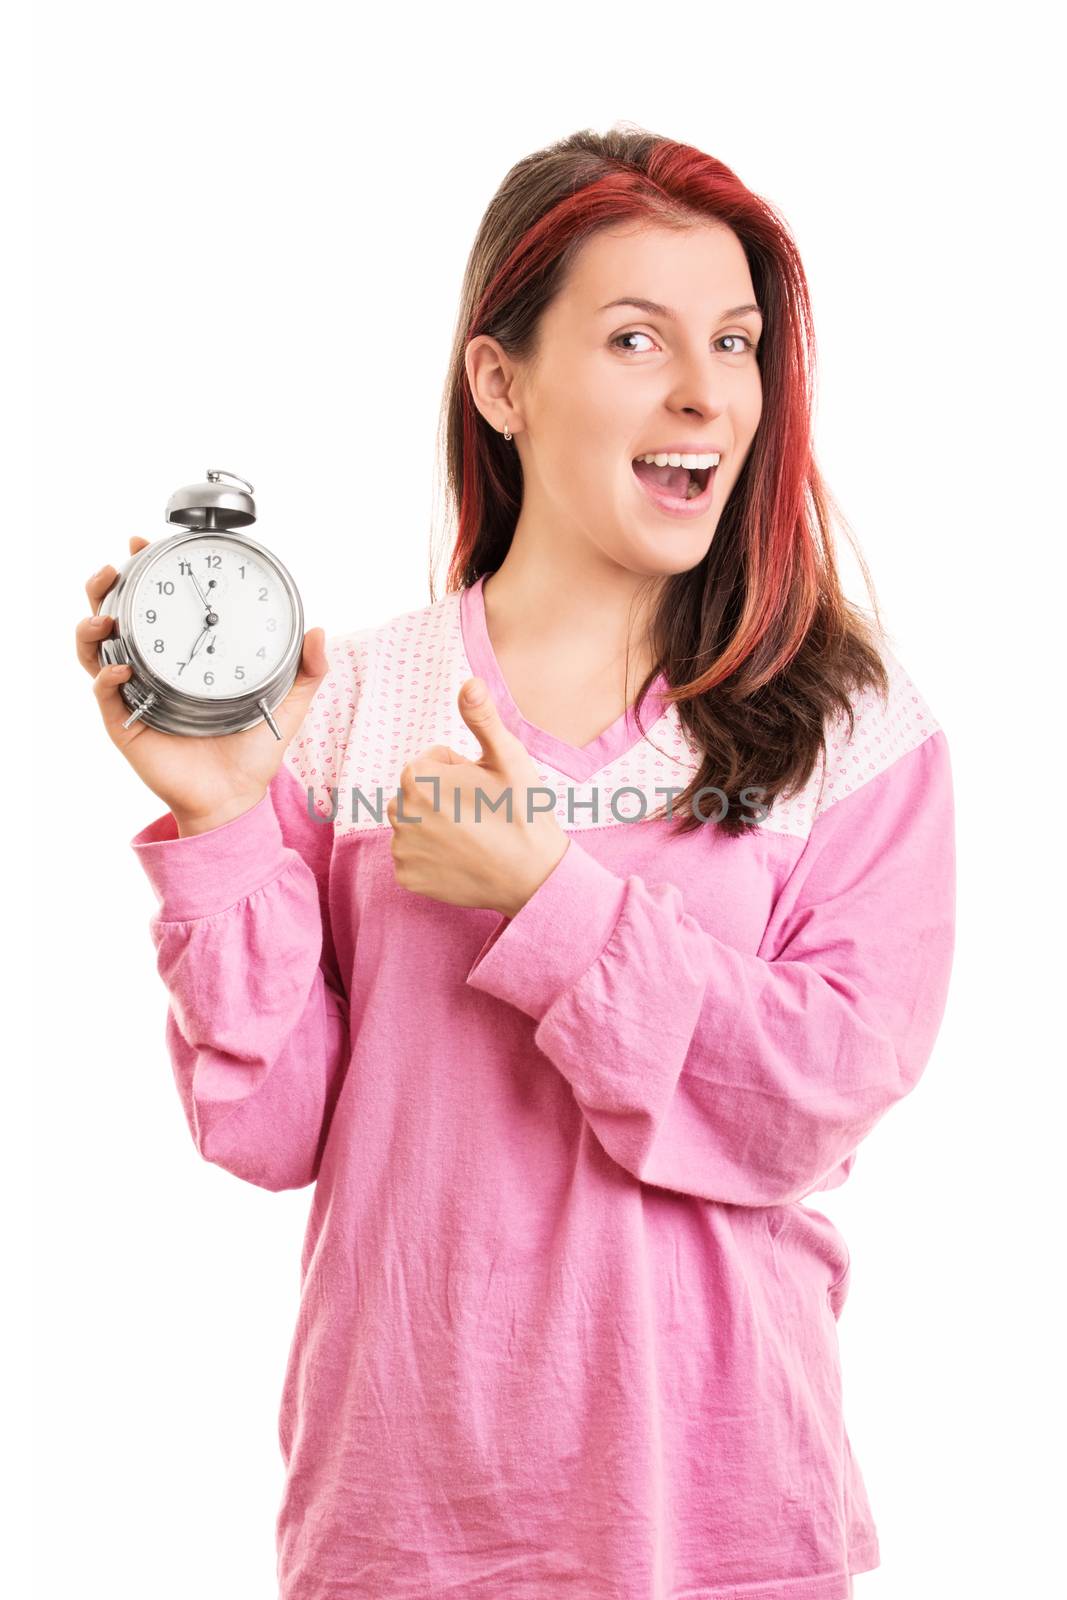 When timing is right. Smiling young girl in pink pajamas holding an alarm clock and giving thumbs up, isolated on white background.